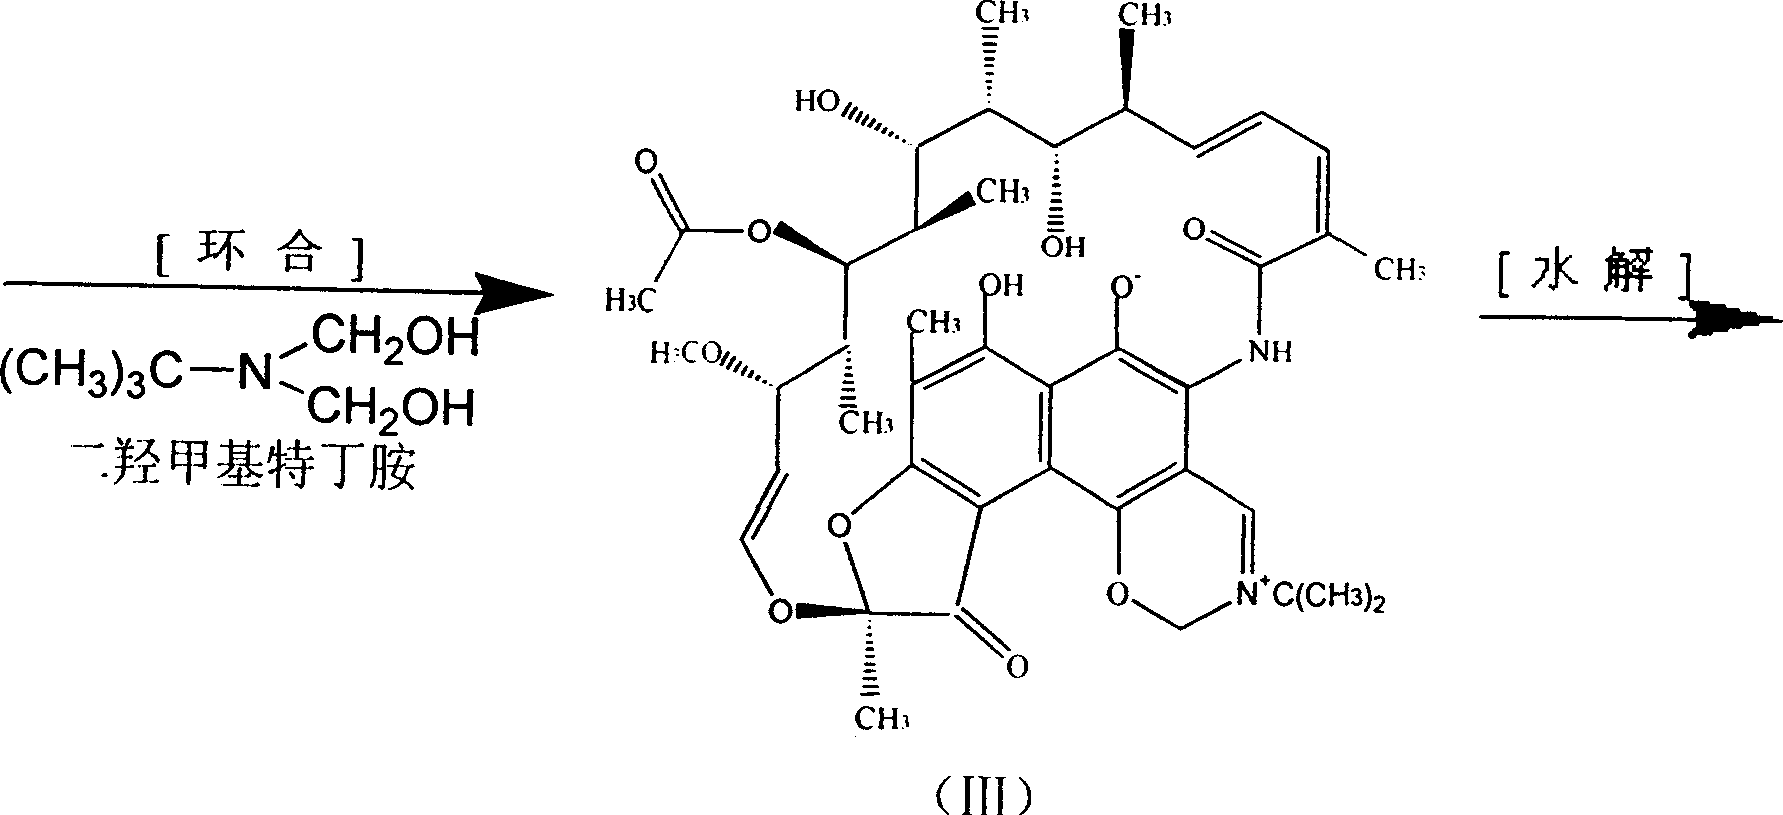 One-pot processing method for synthesizing rifampicin